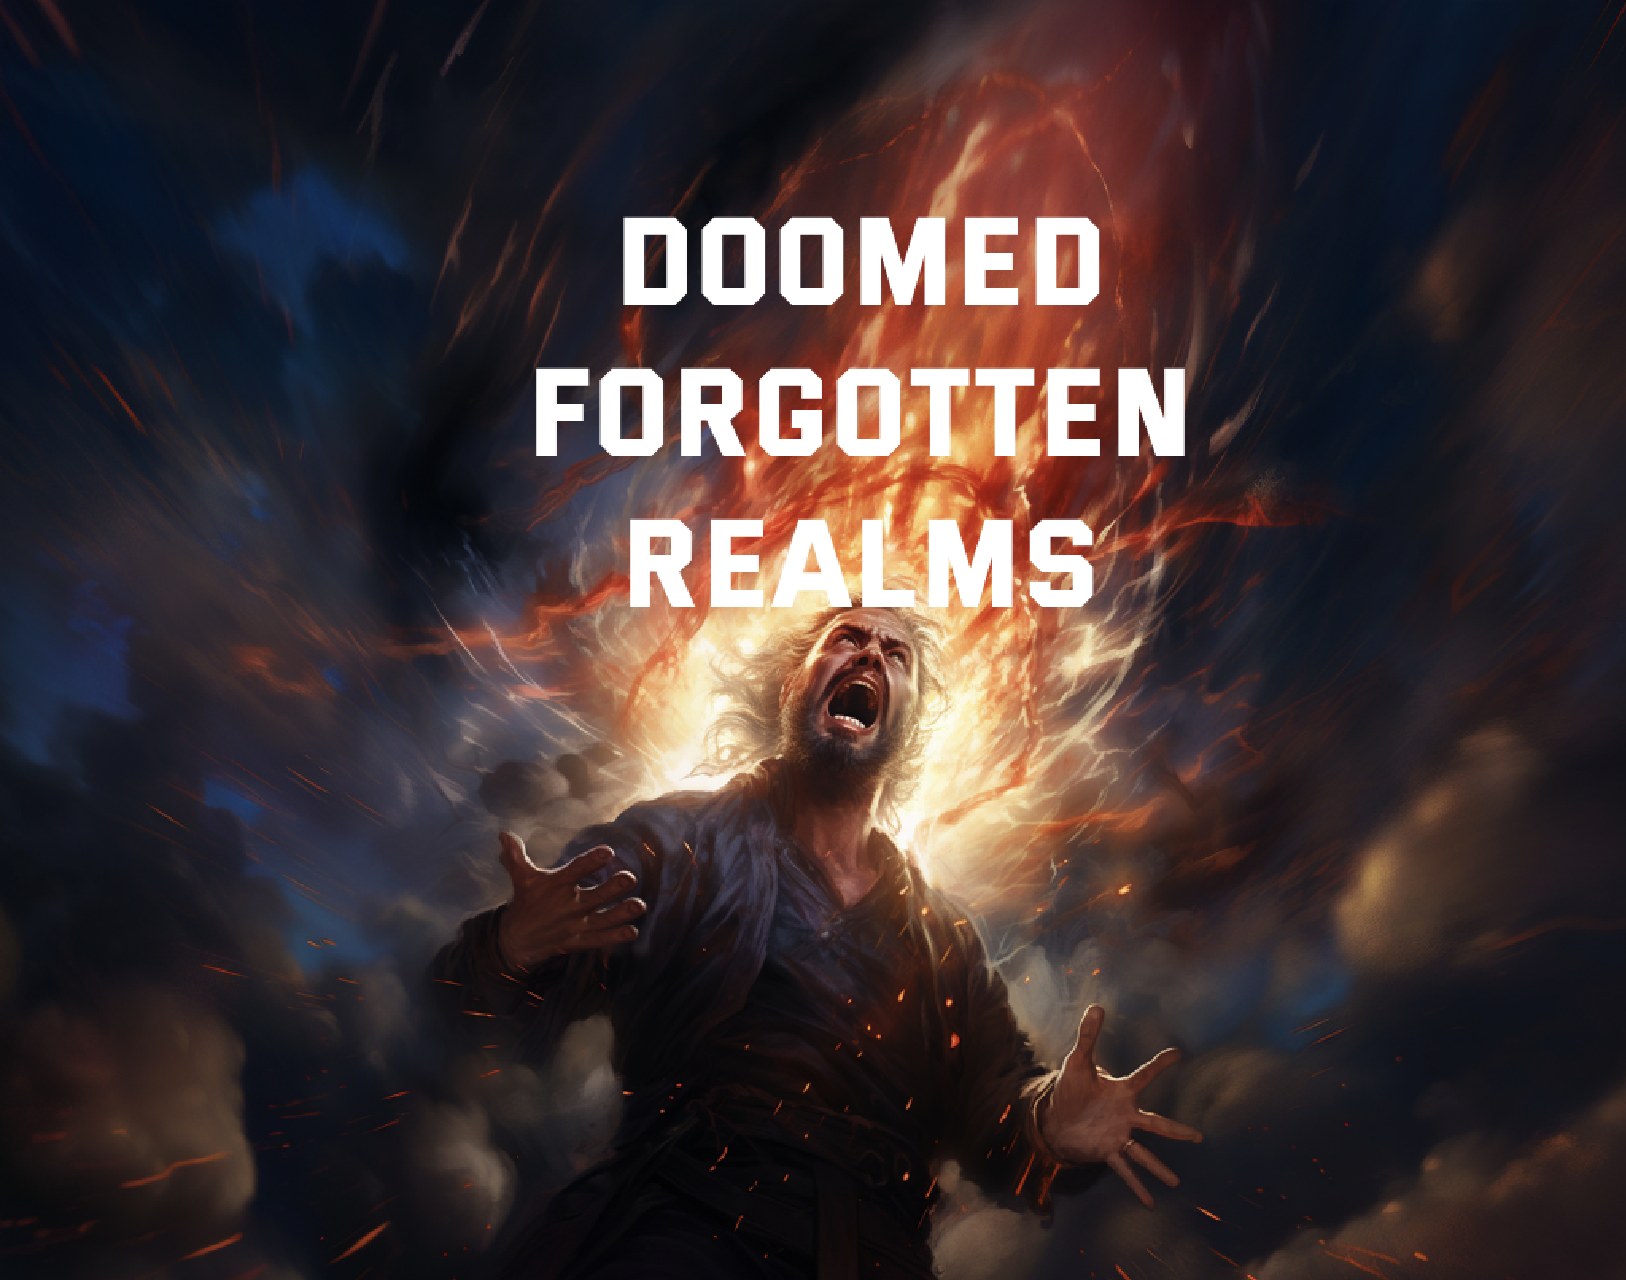 Doomed Forgotten Realms is the darkest possible Dungeons & Dragons